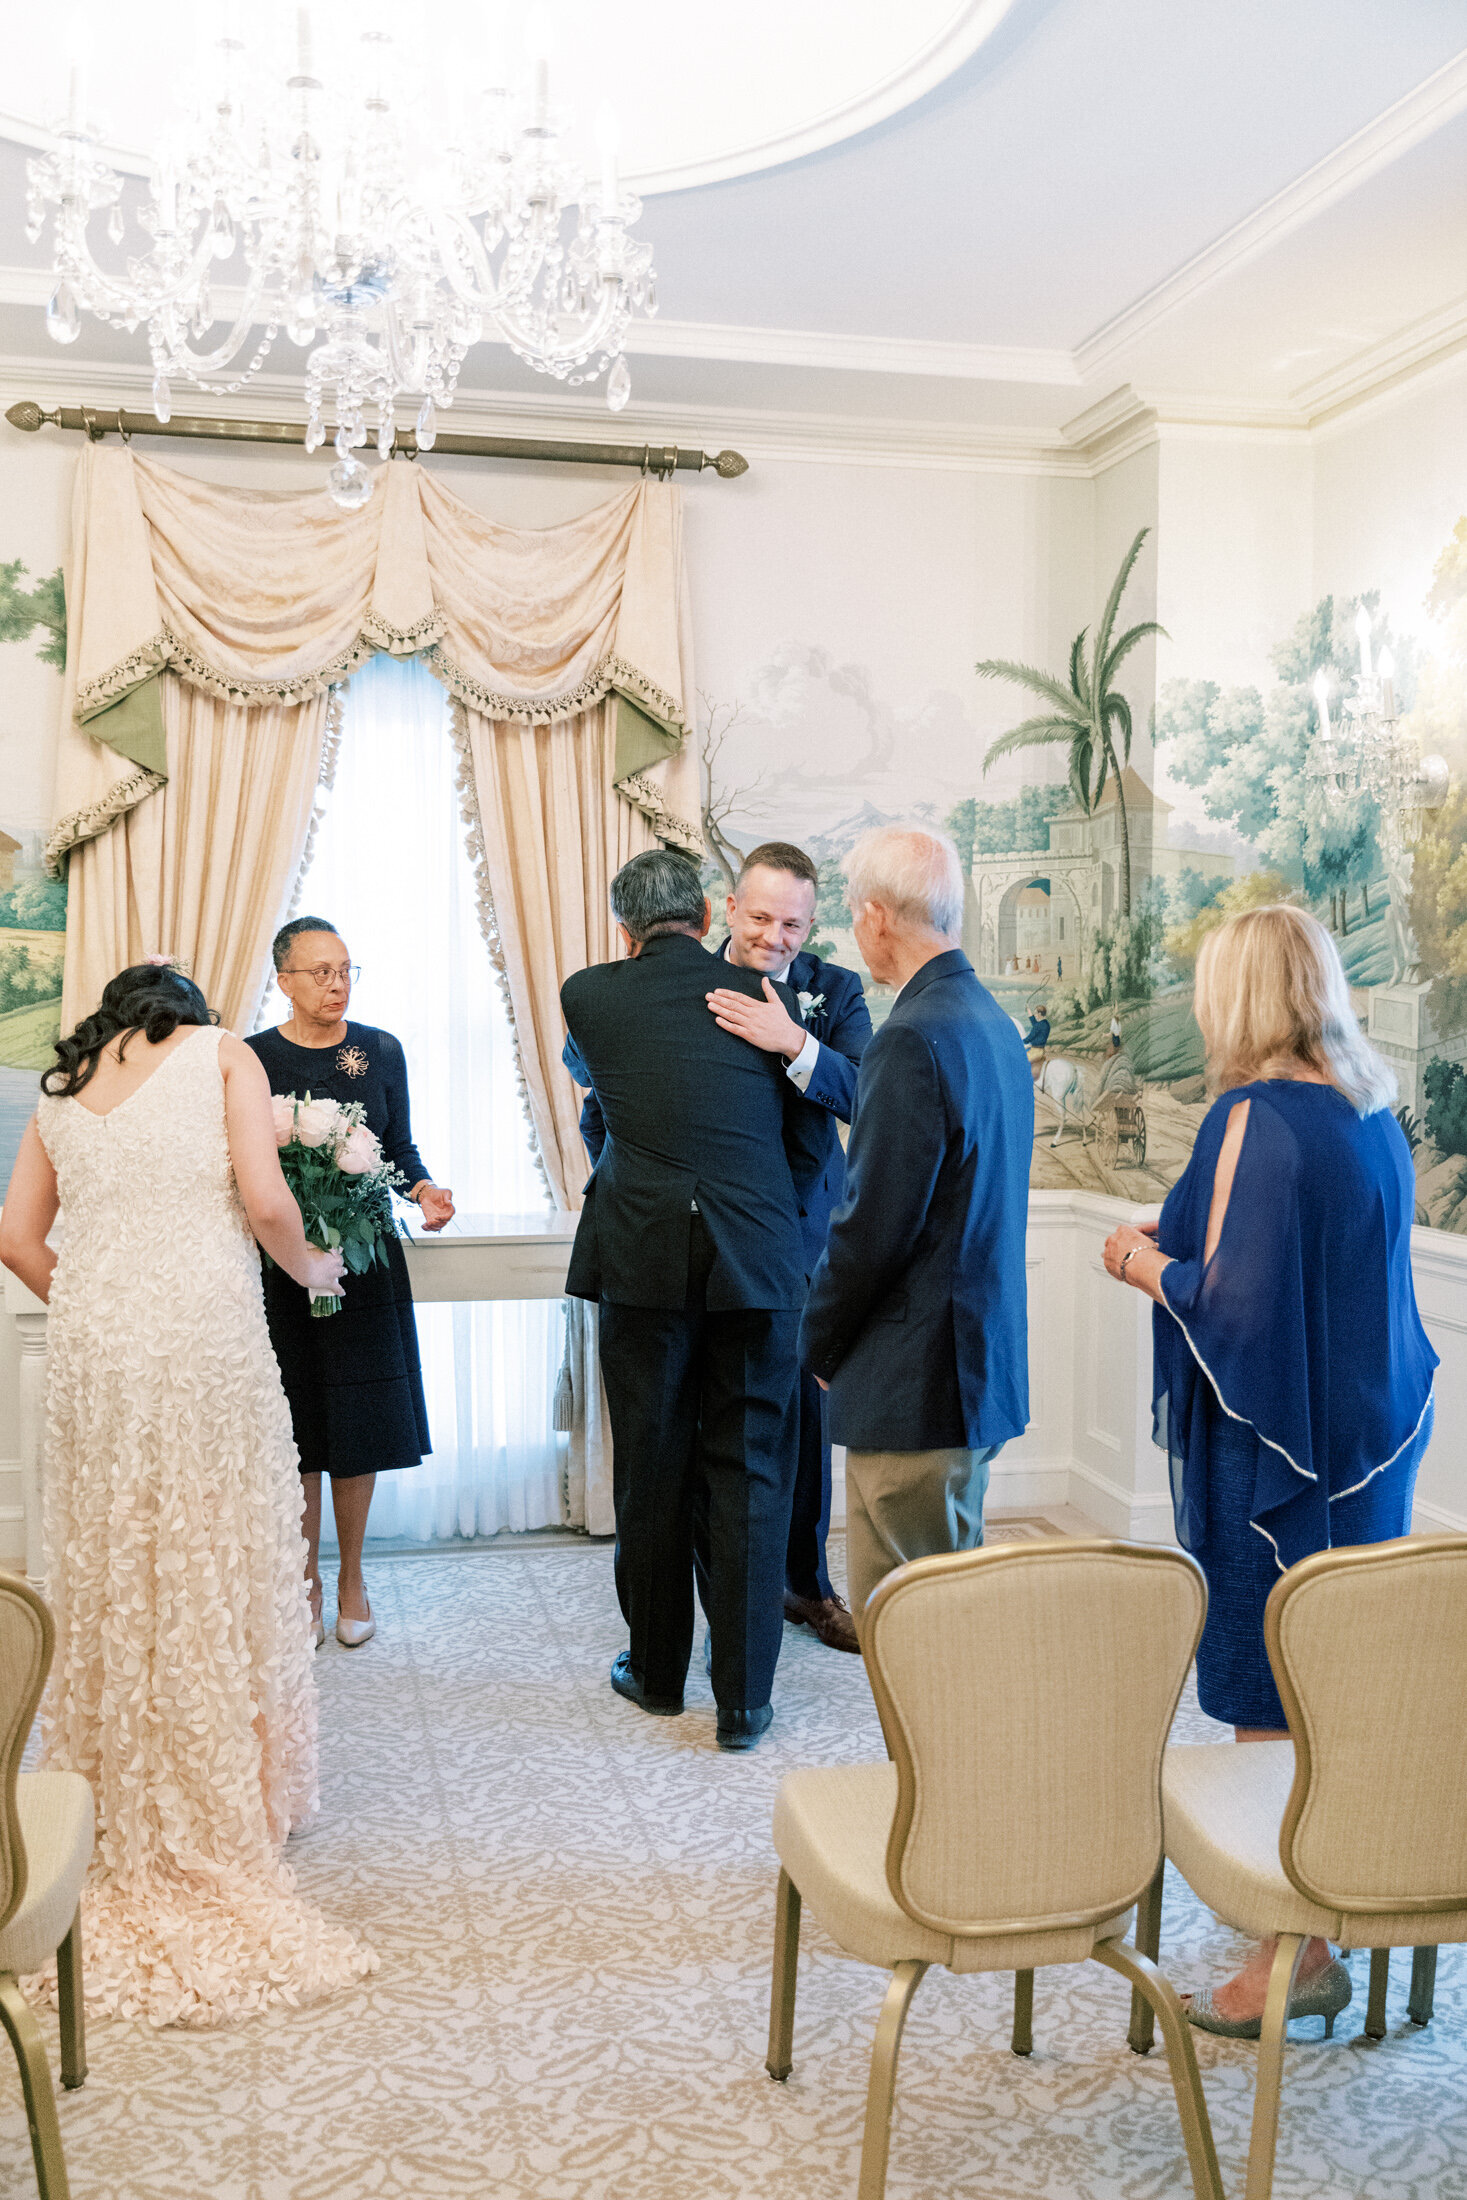 Bride and groom are about to get married at their DC wedding venue taken by Rachel Jordan Photography